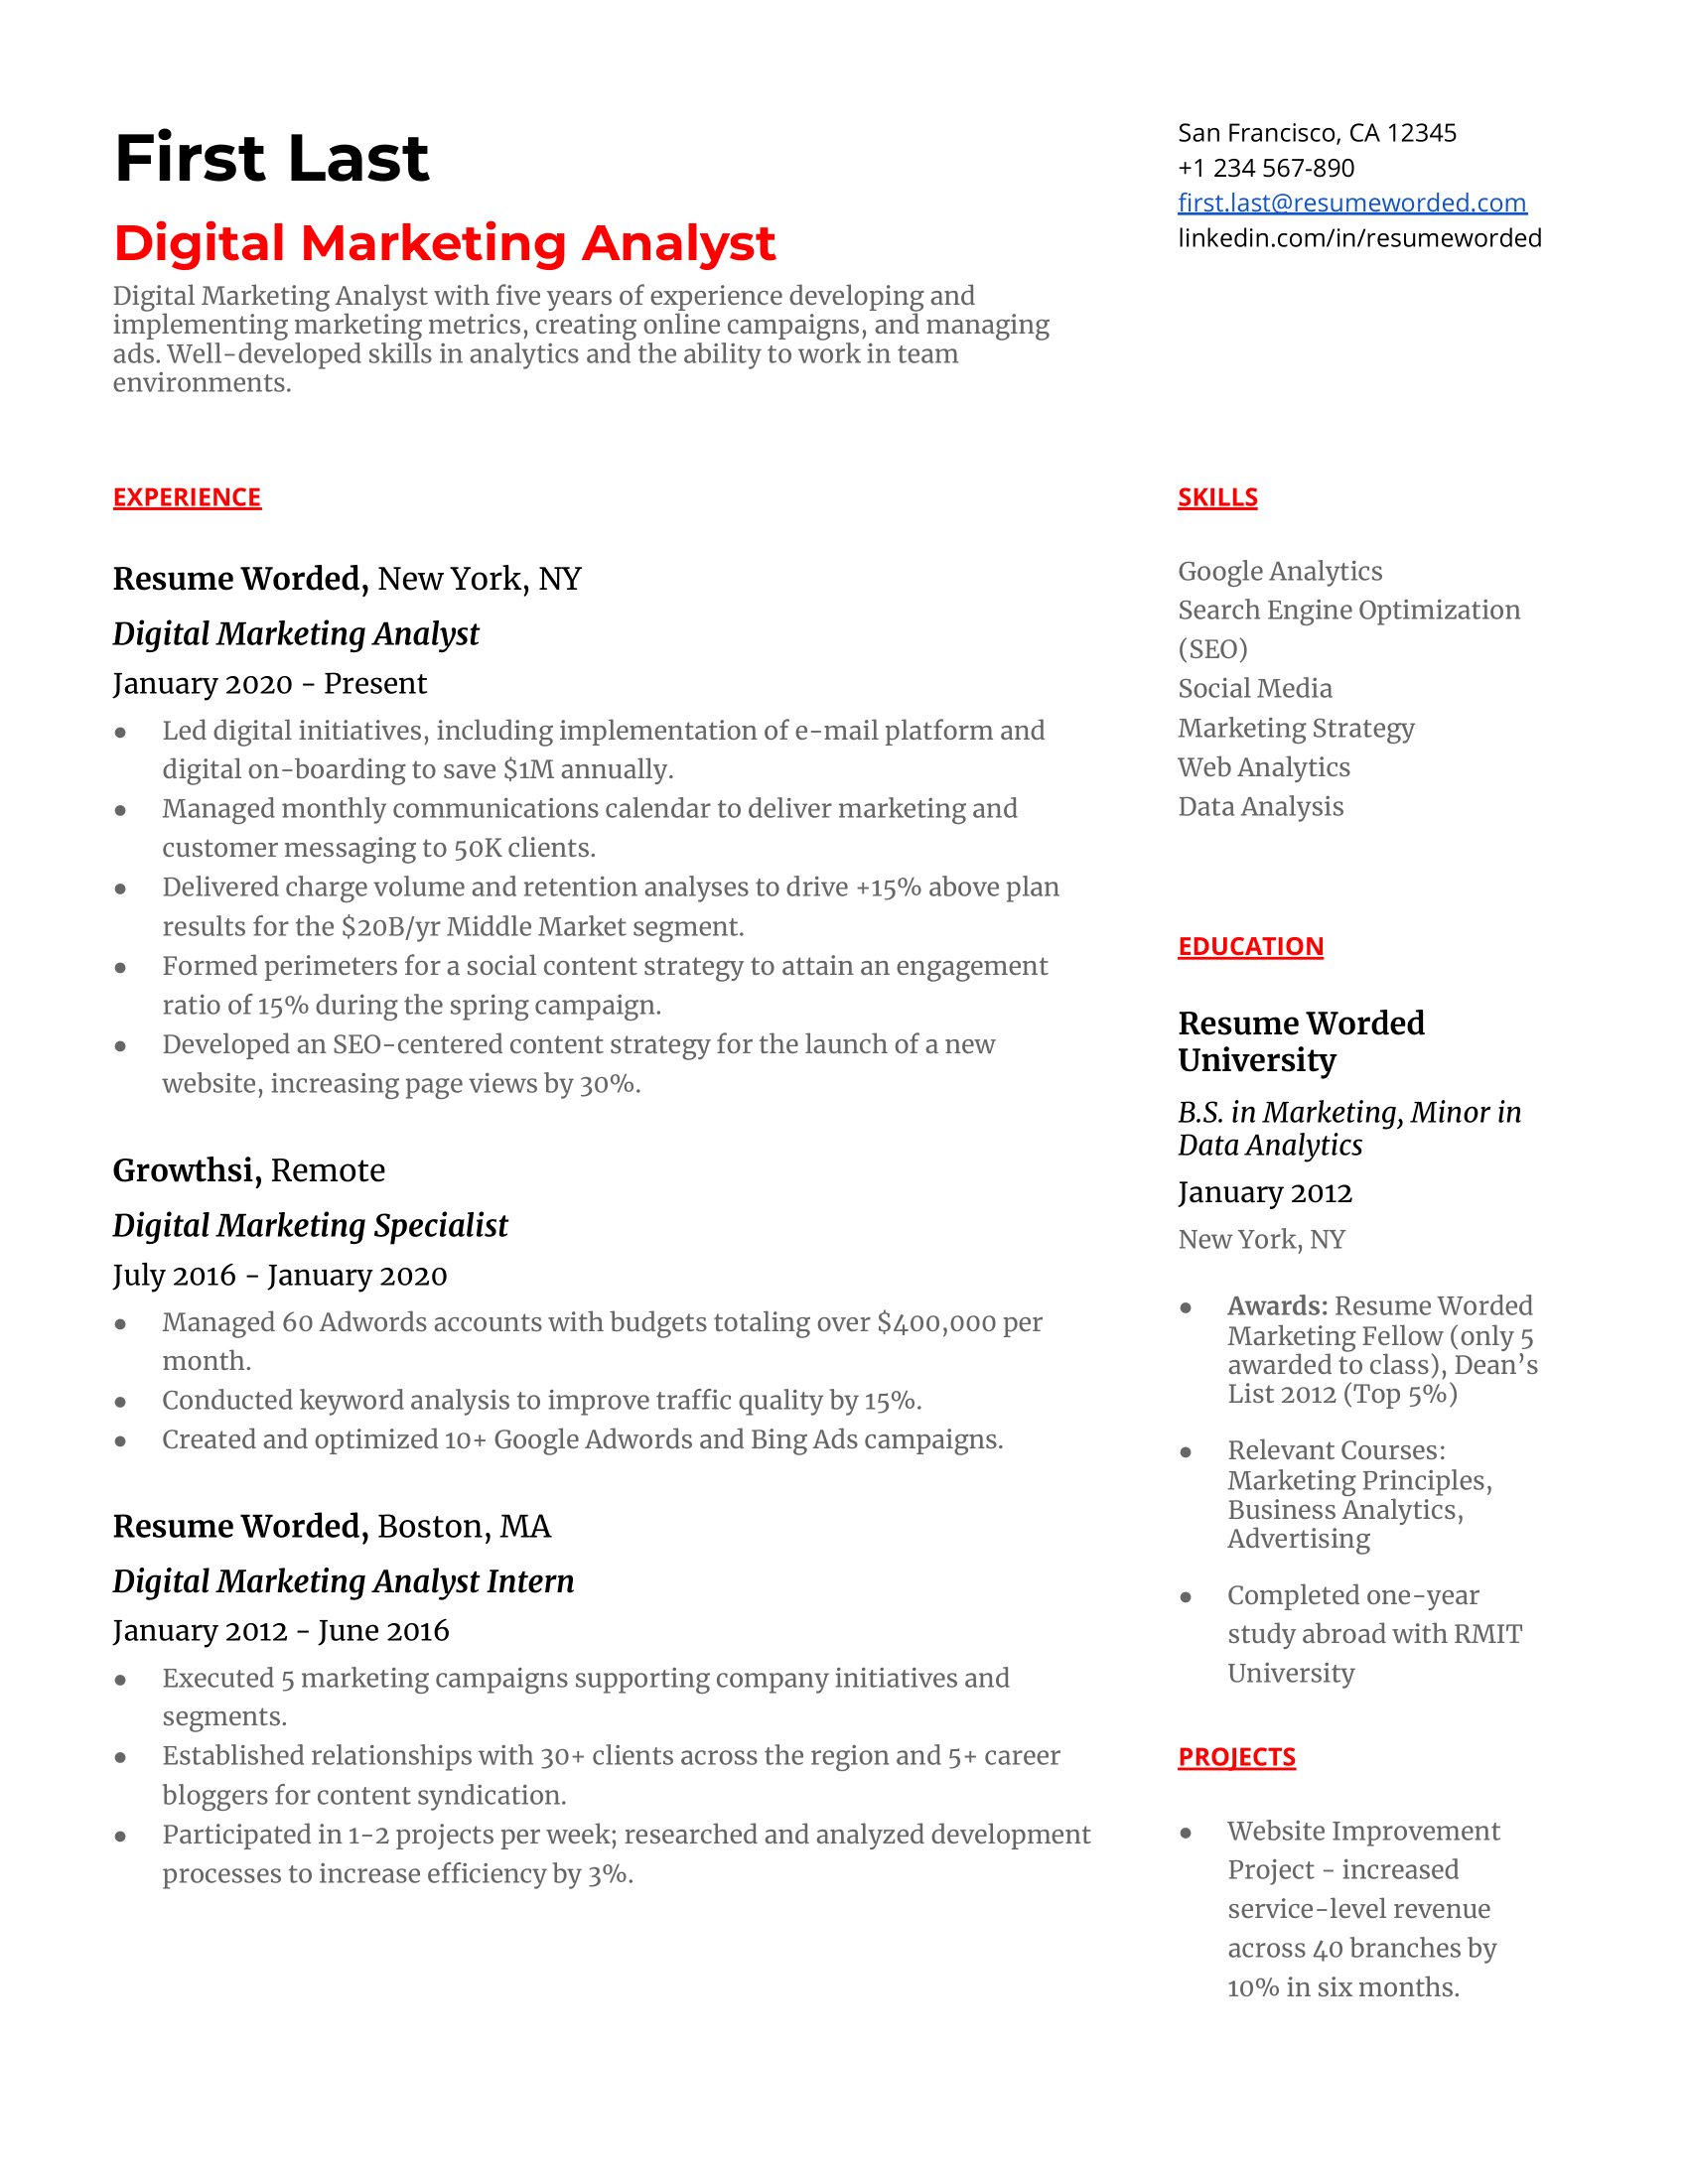 A digital marketing analyst resume that showcases experience analyzing market trends, supported by relevant hard skills and education.